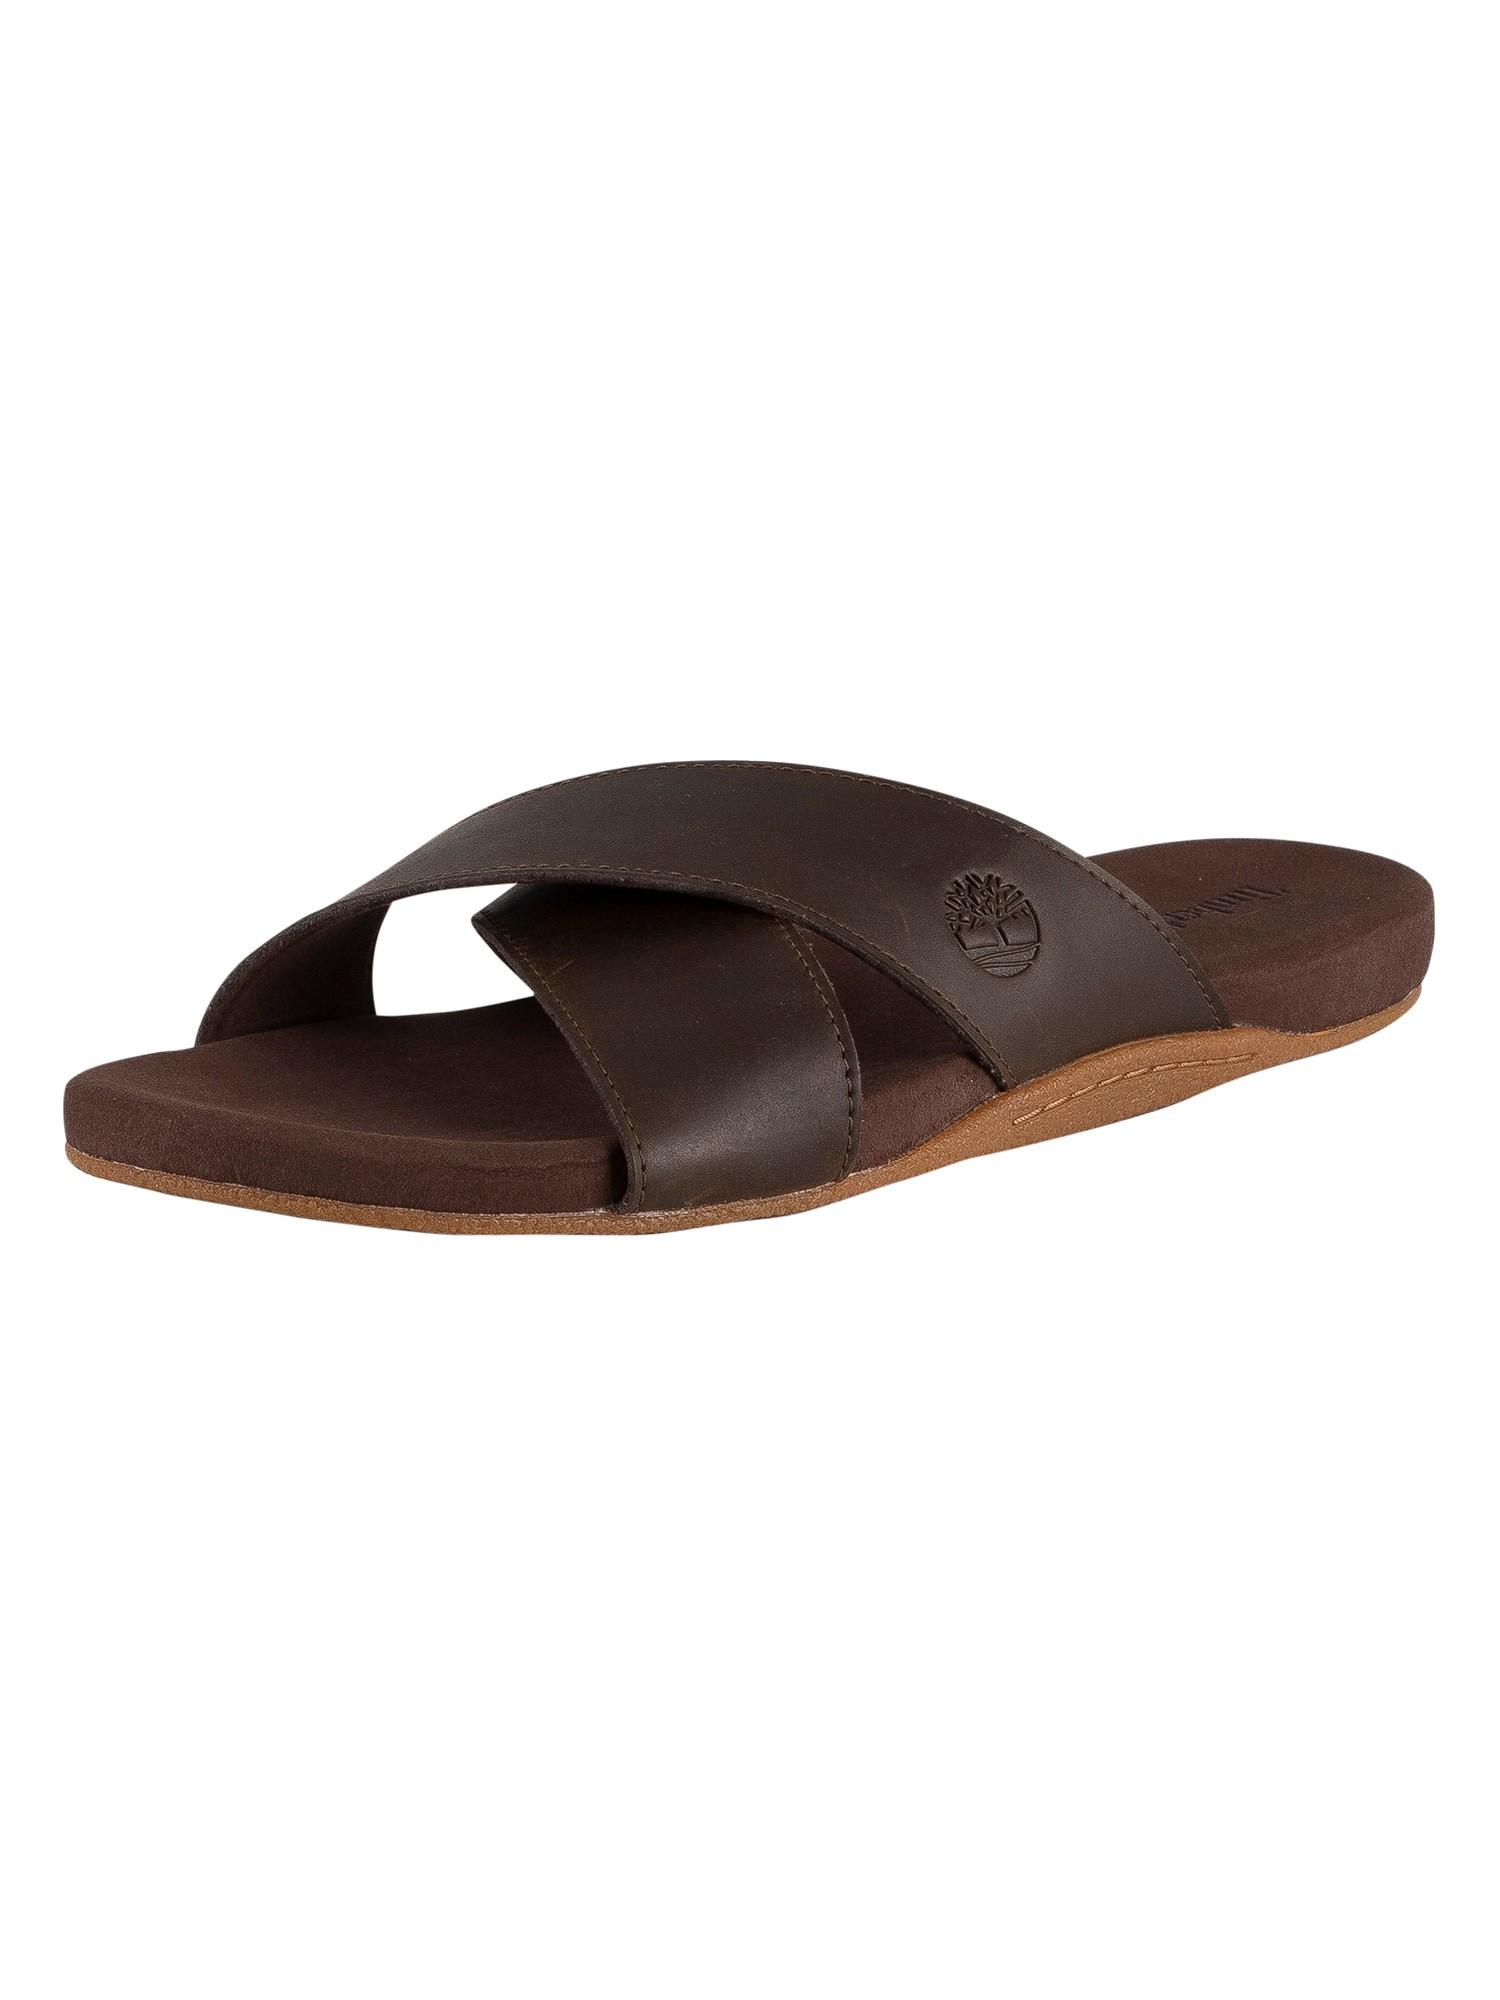 Timberland Seaton Bay Strap Leather Sandals in Black Black Leather (Brown)  for Men - Save 41% | Lyst UK